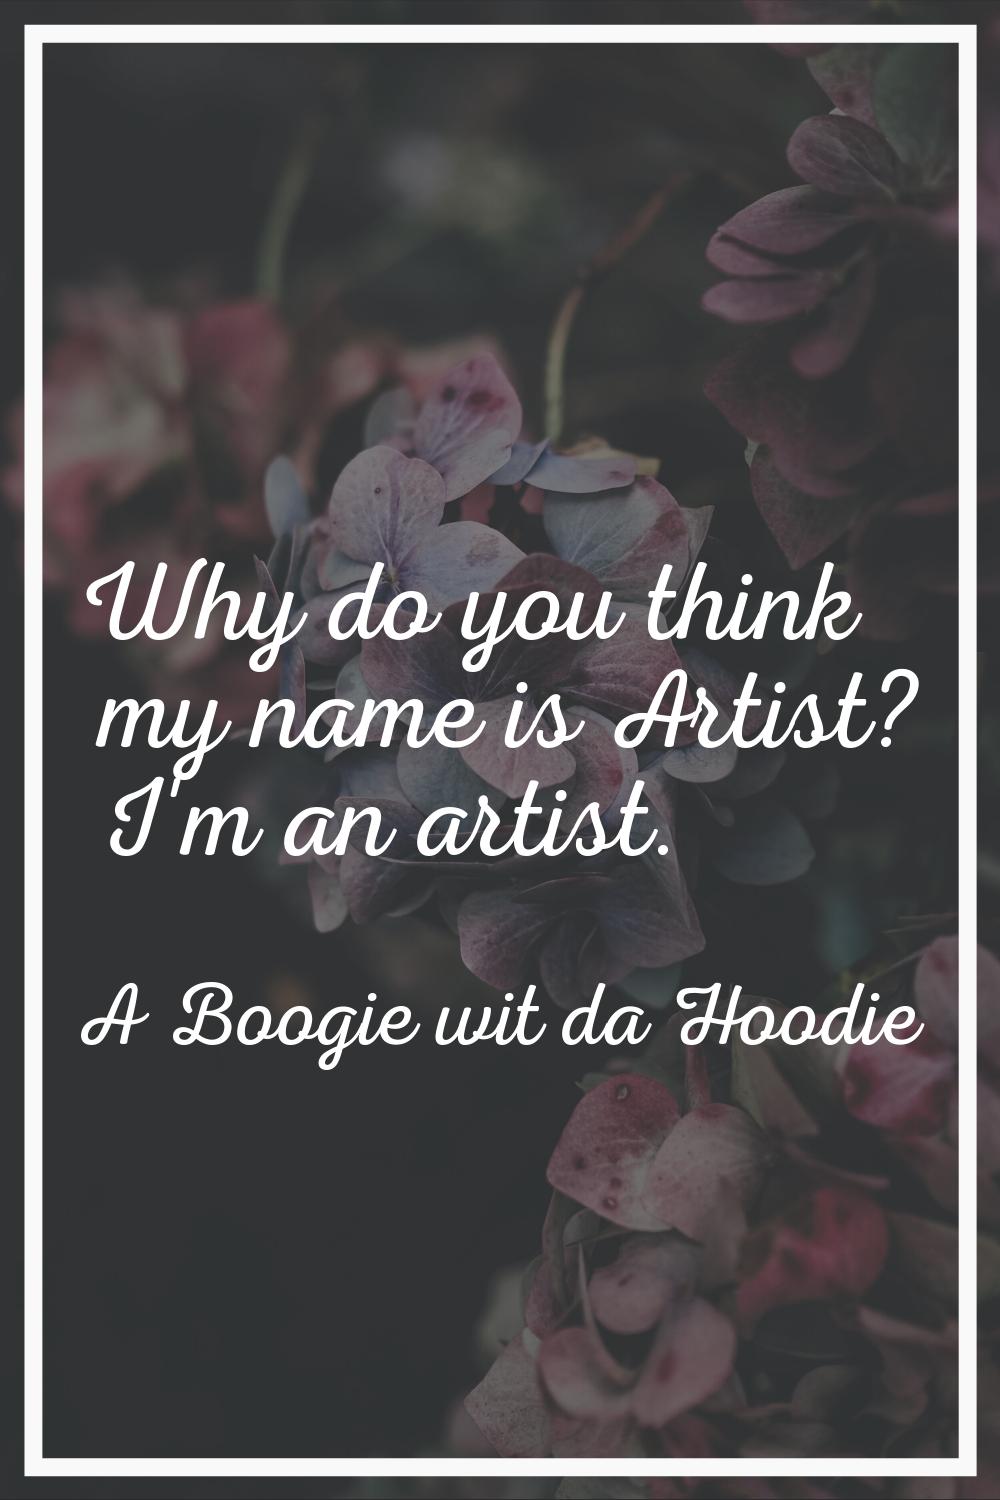 Why do you think my name is Artist? I'm an artist.